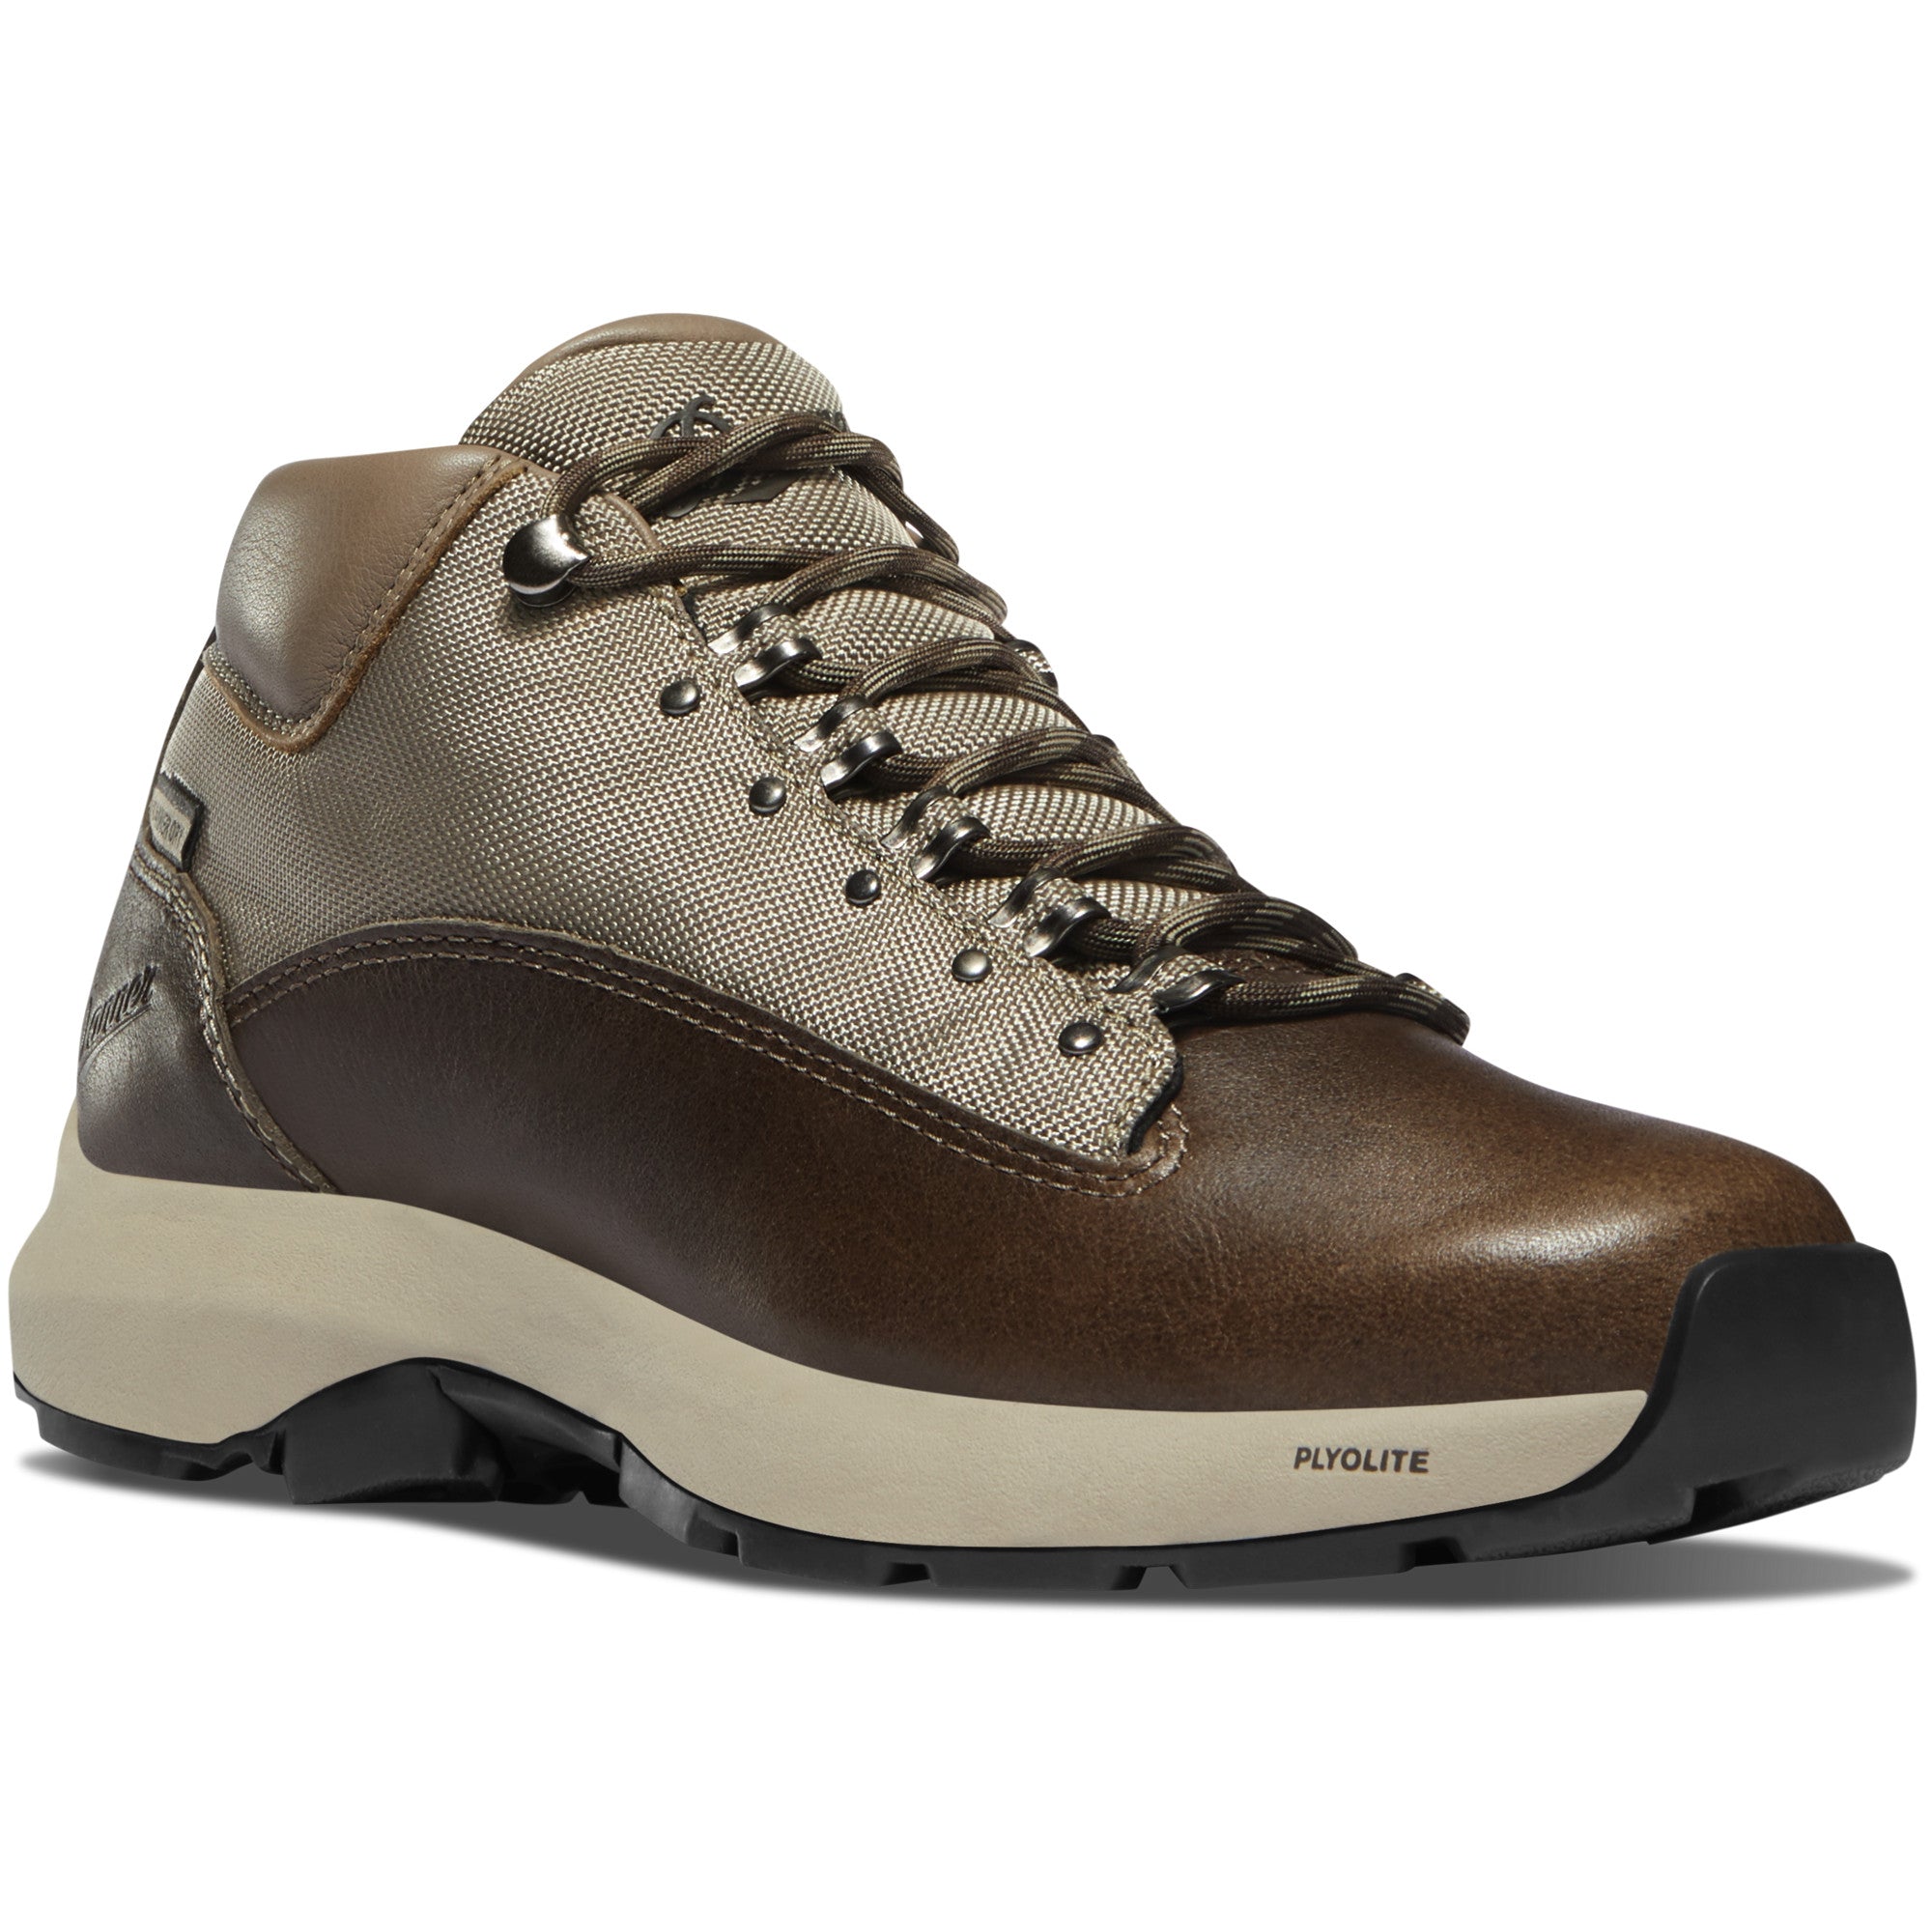 Danner Women's Caprine EVO Danner Dry Waterproof Lifestyle Boot in Chocolate/Taupe from the side